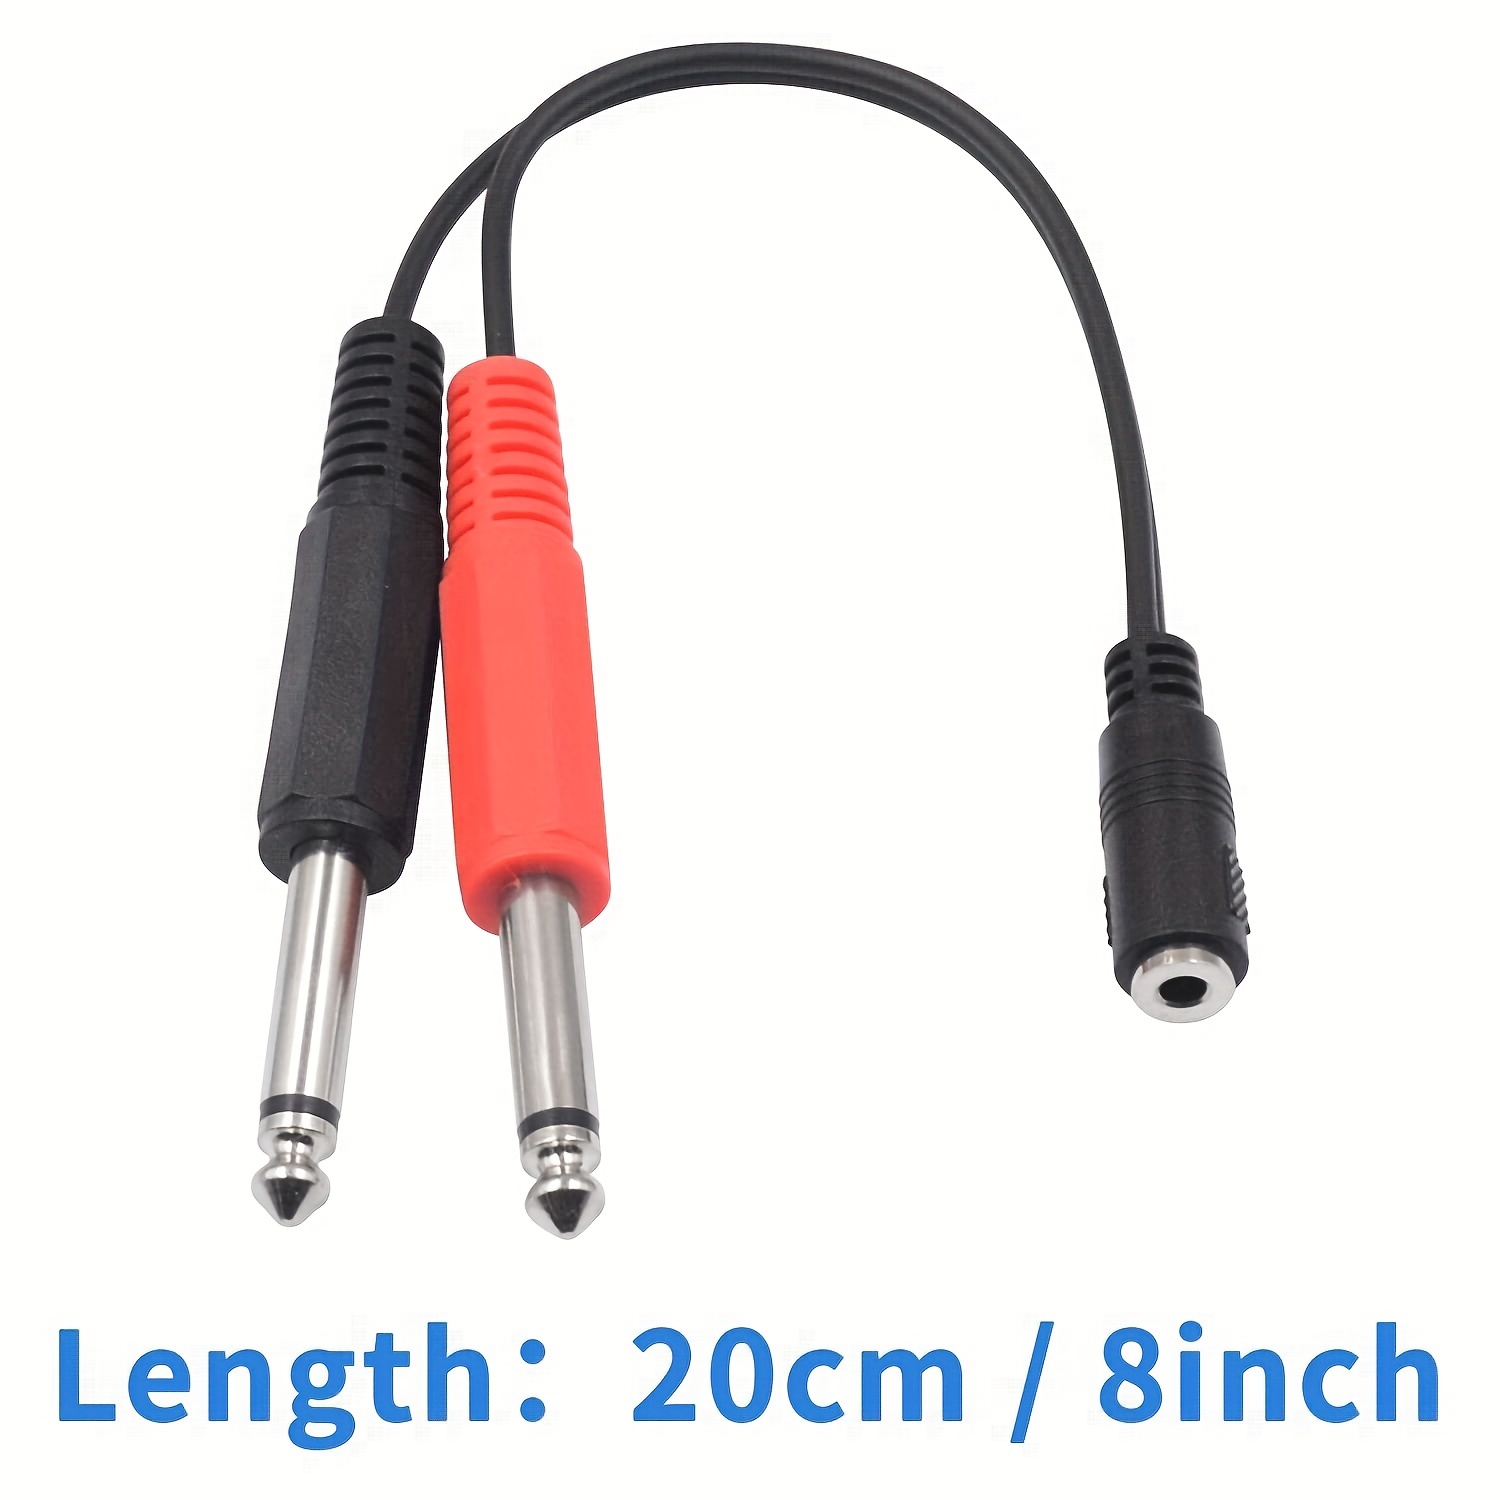  Poyiccot RCA to 1/4 Adapter, RCA Female to 1/4 '' Splitter  Cable, 6.35mm 1/4 inch TRS Stereo Jack Male to 2 RCA Female Plug Y Splitter  Adapter Cable, 6.35mm to RCA